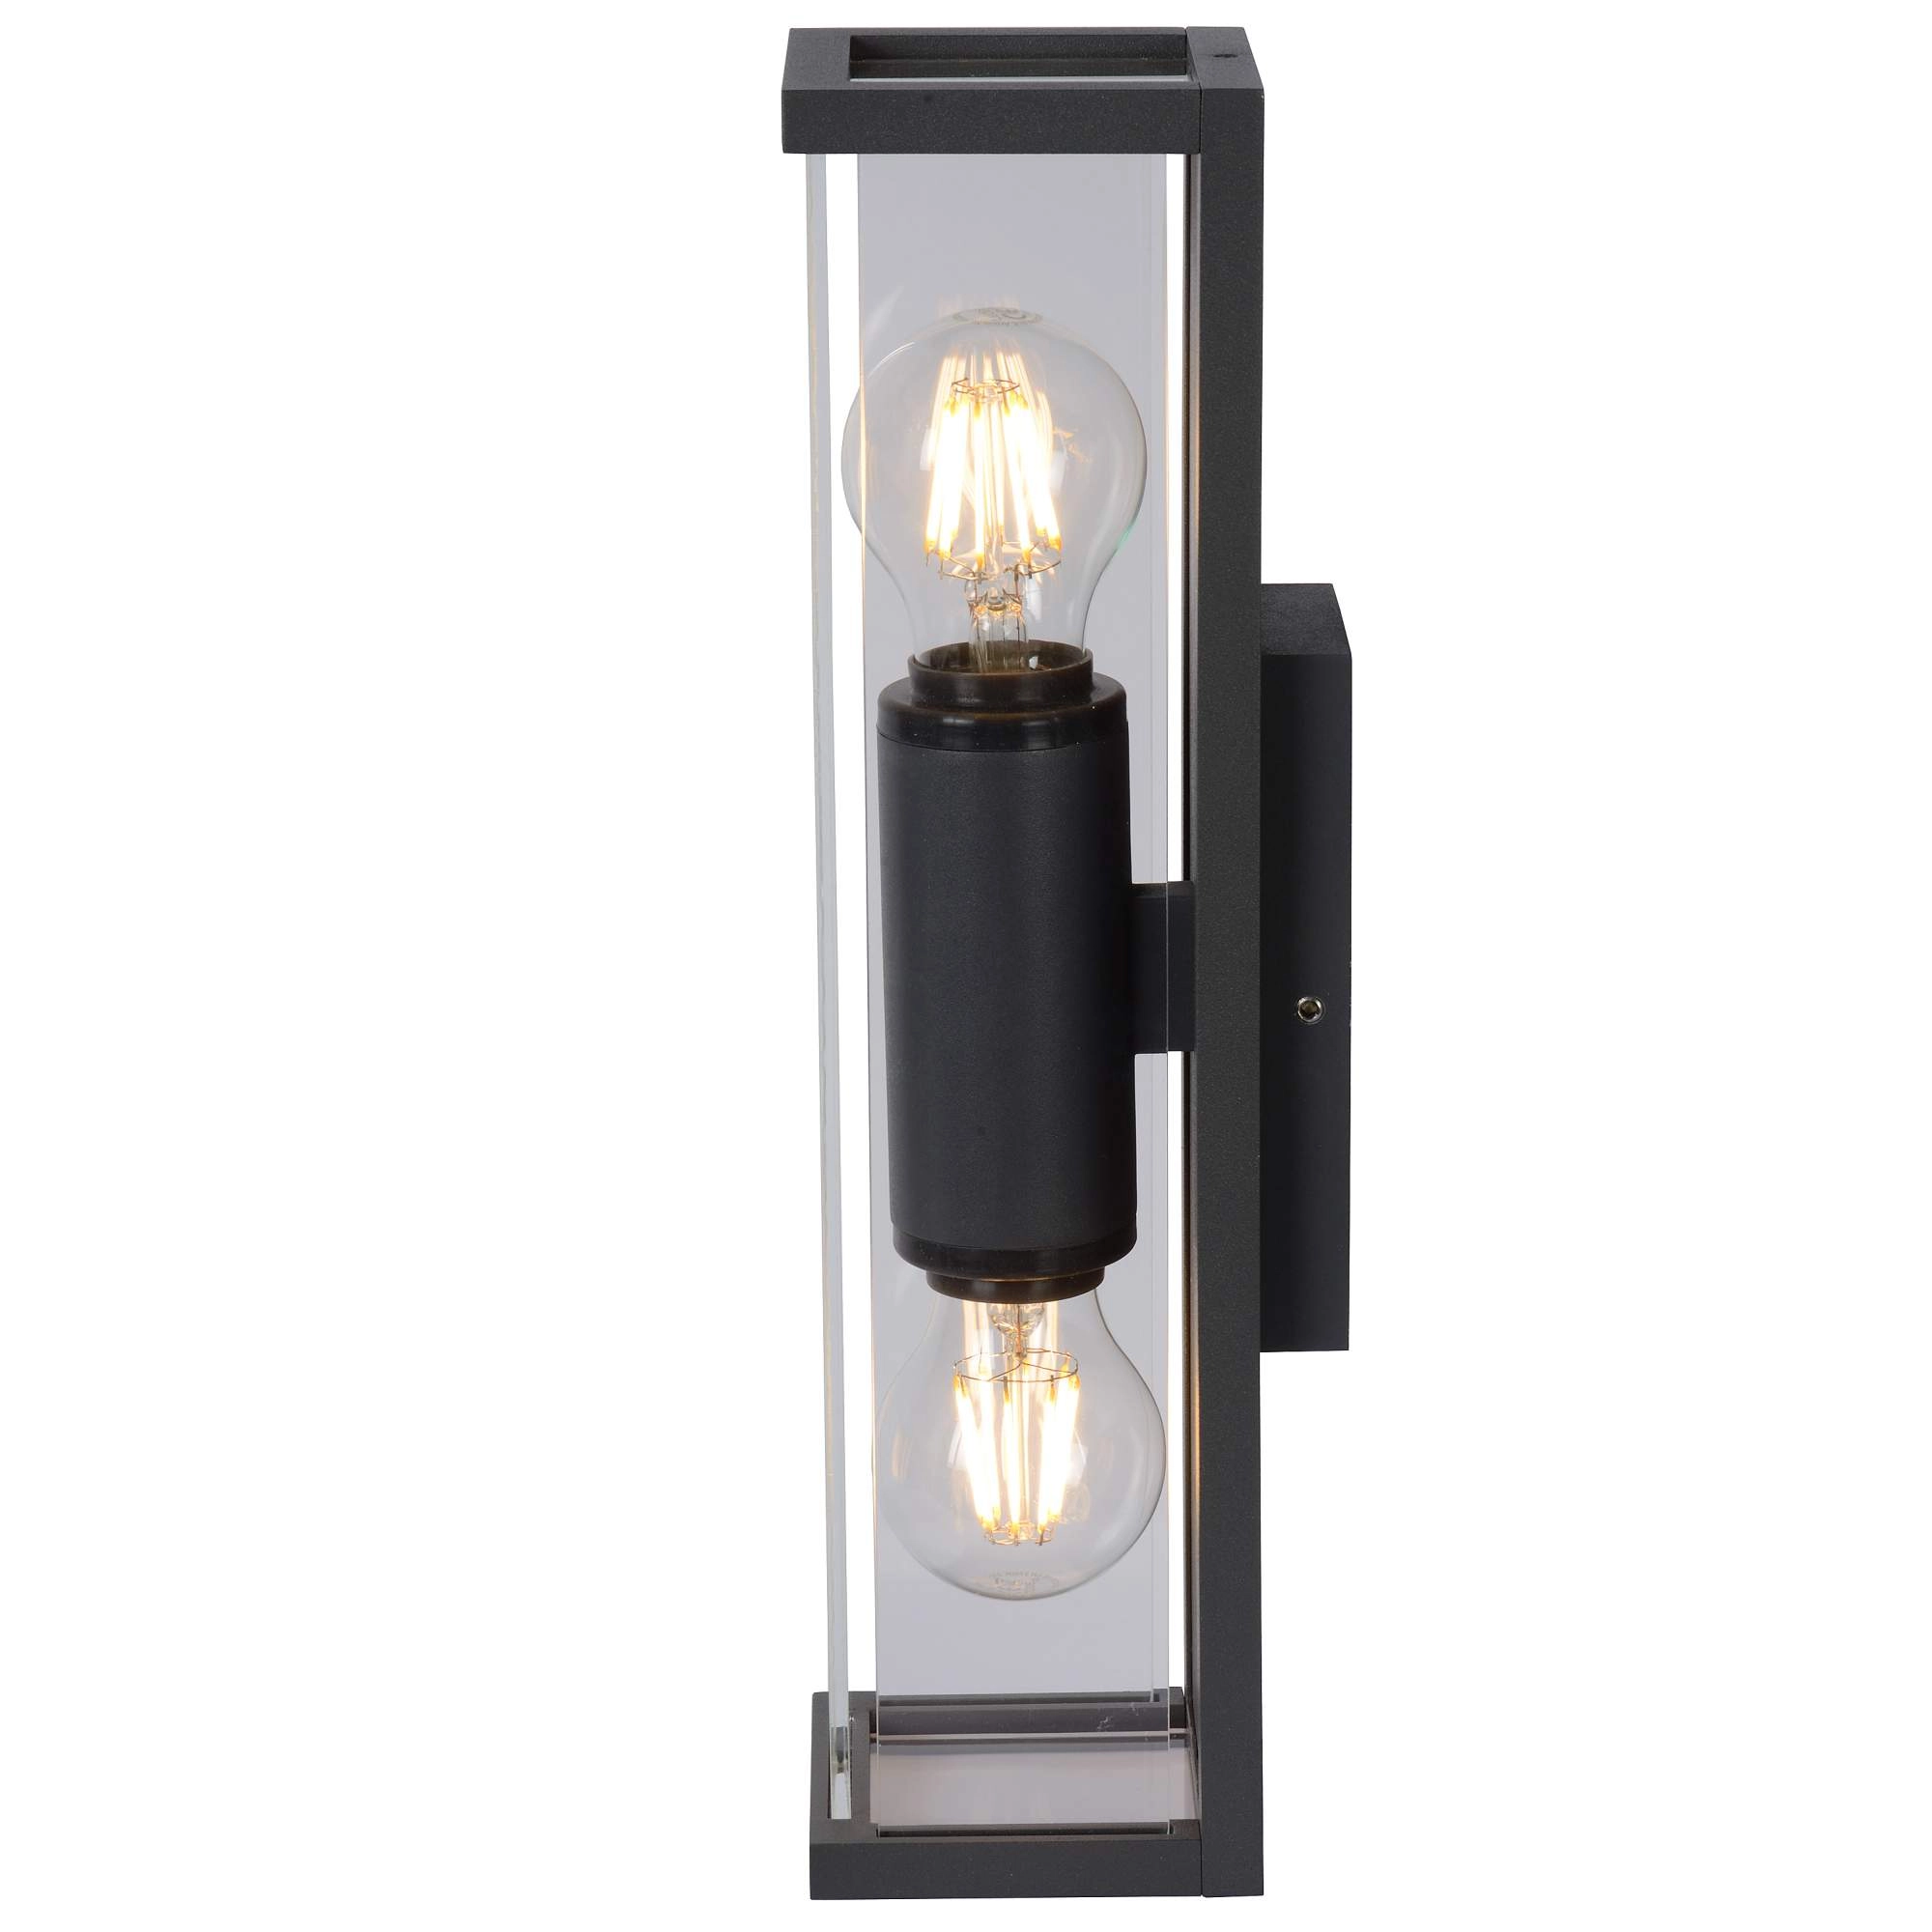 LU 27885/02/30 Lucide CLAIRE - Wall light Outdoor - 2xE27 - IP54 - Anthracite